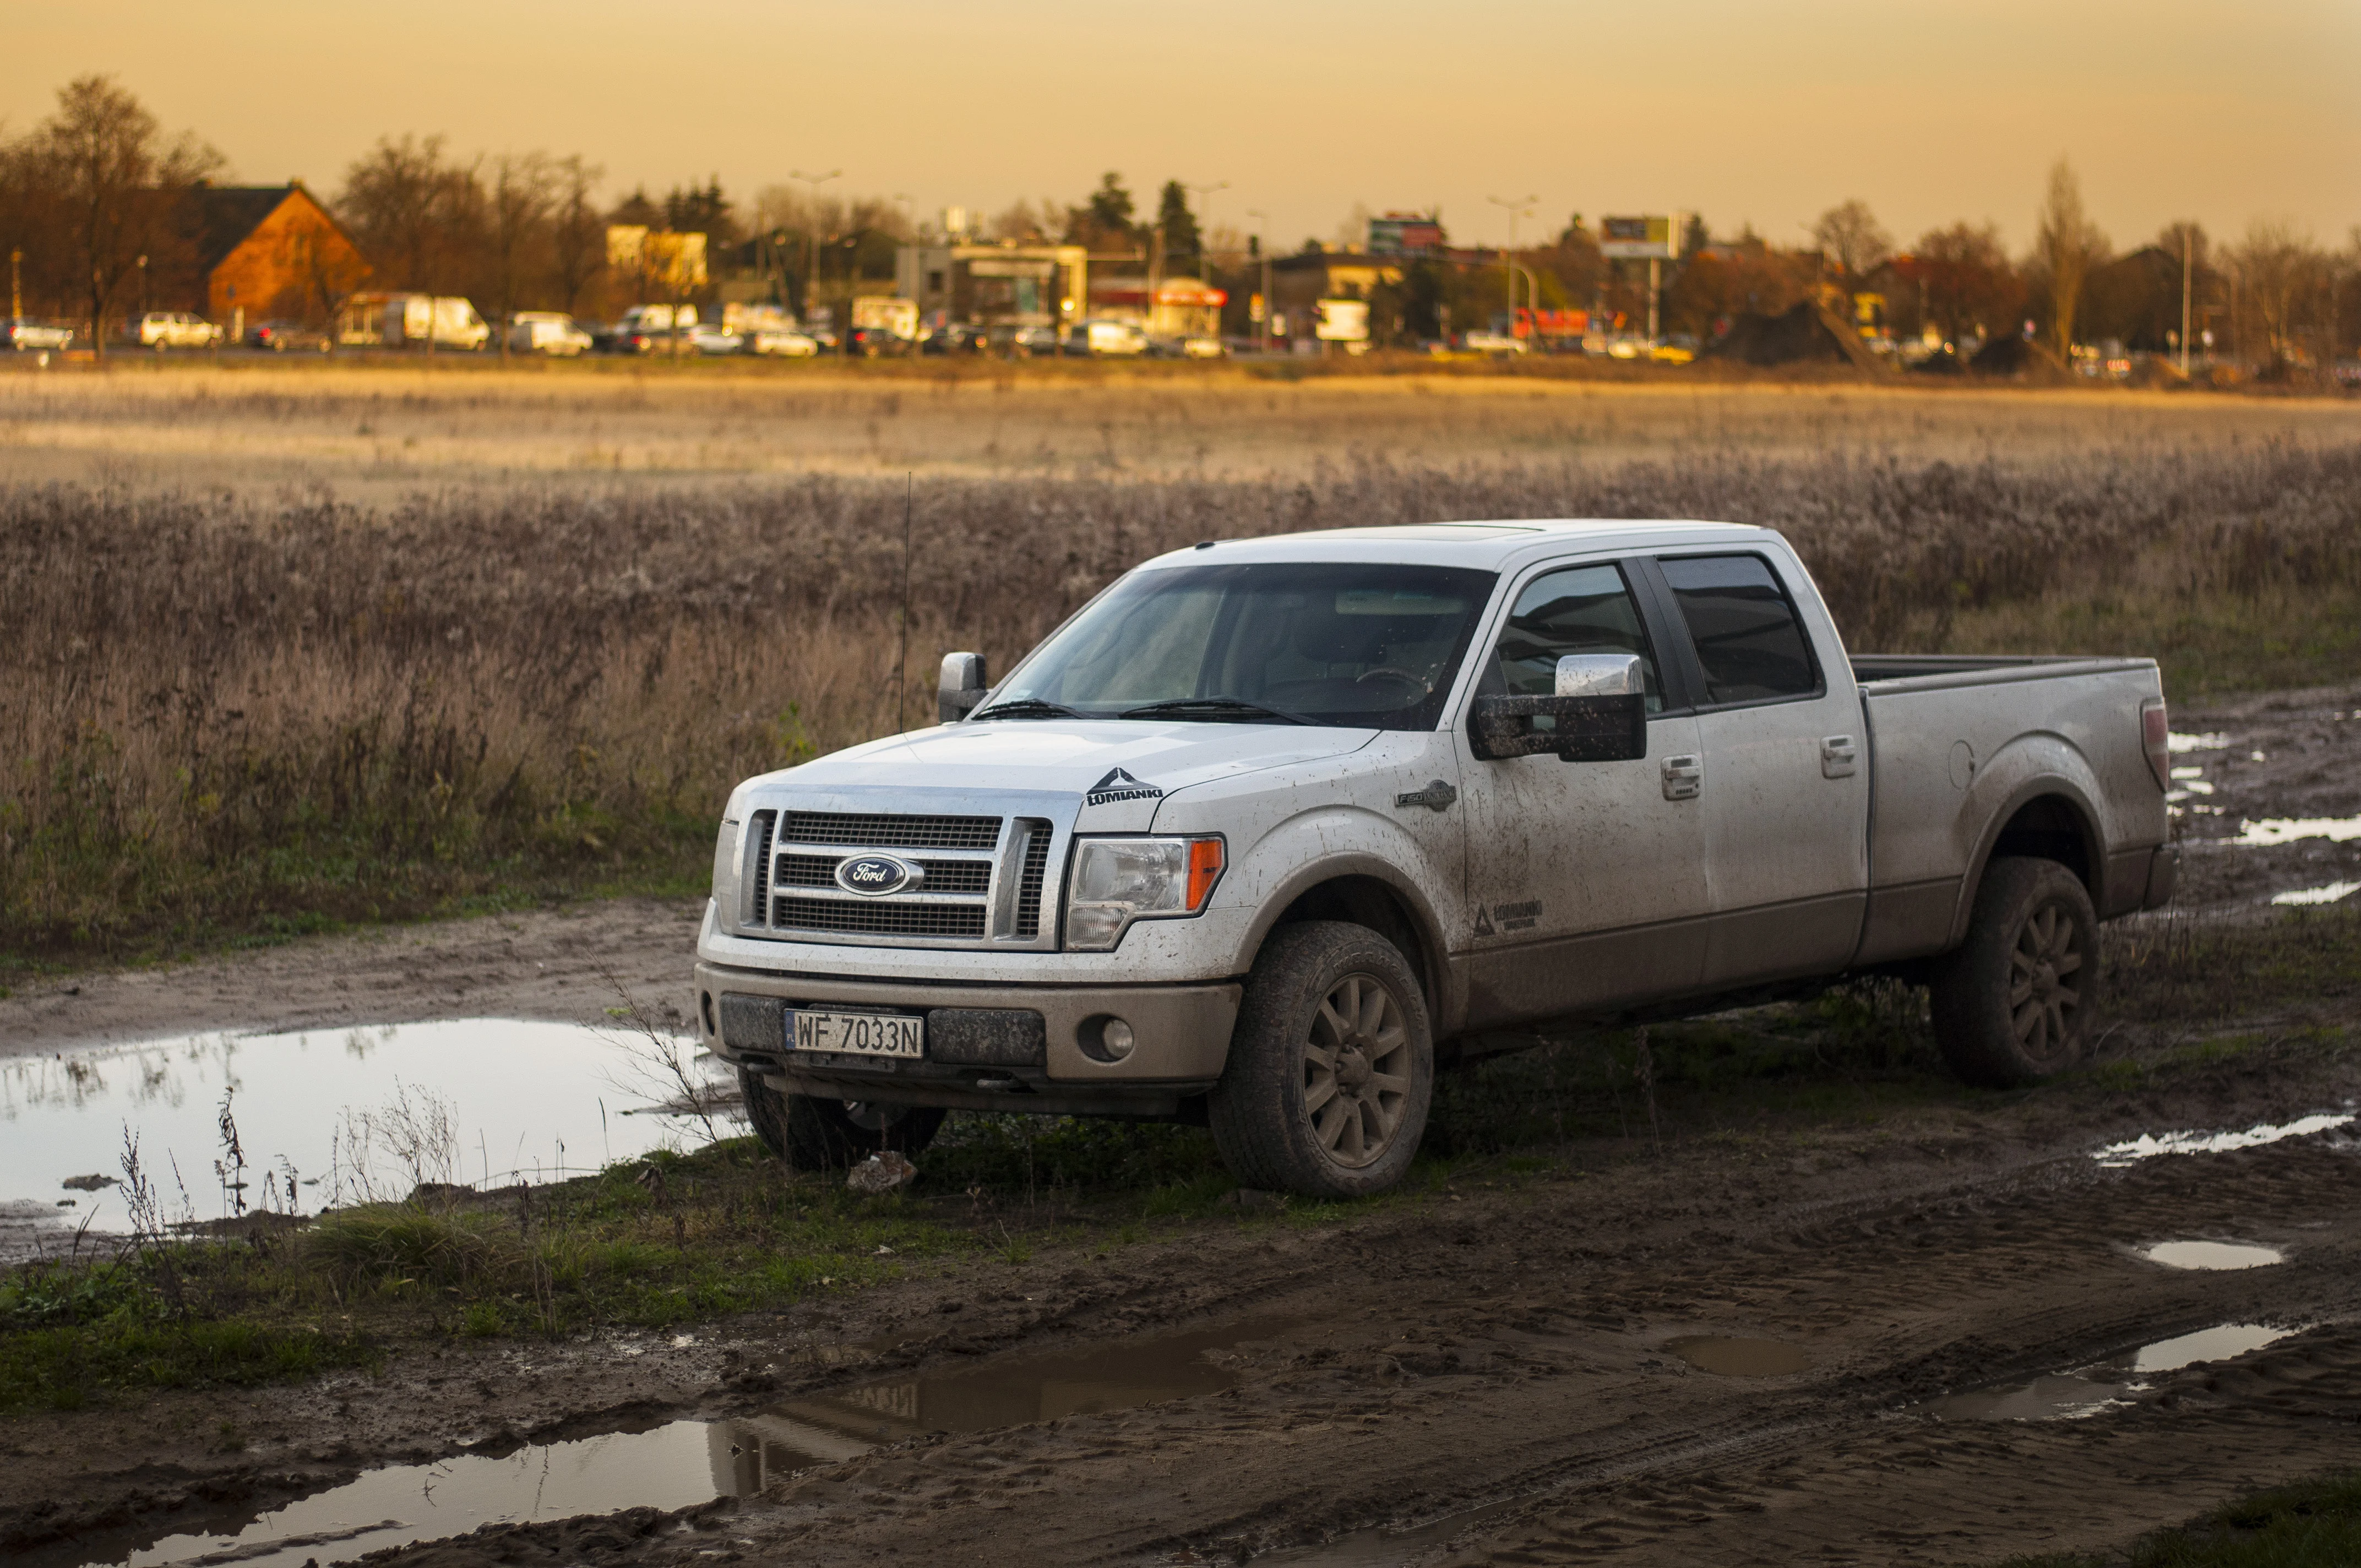 Ford recalls 1.2 million F-150s for faulty automatic transmission